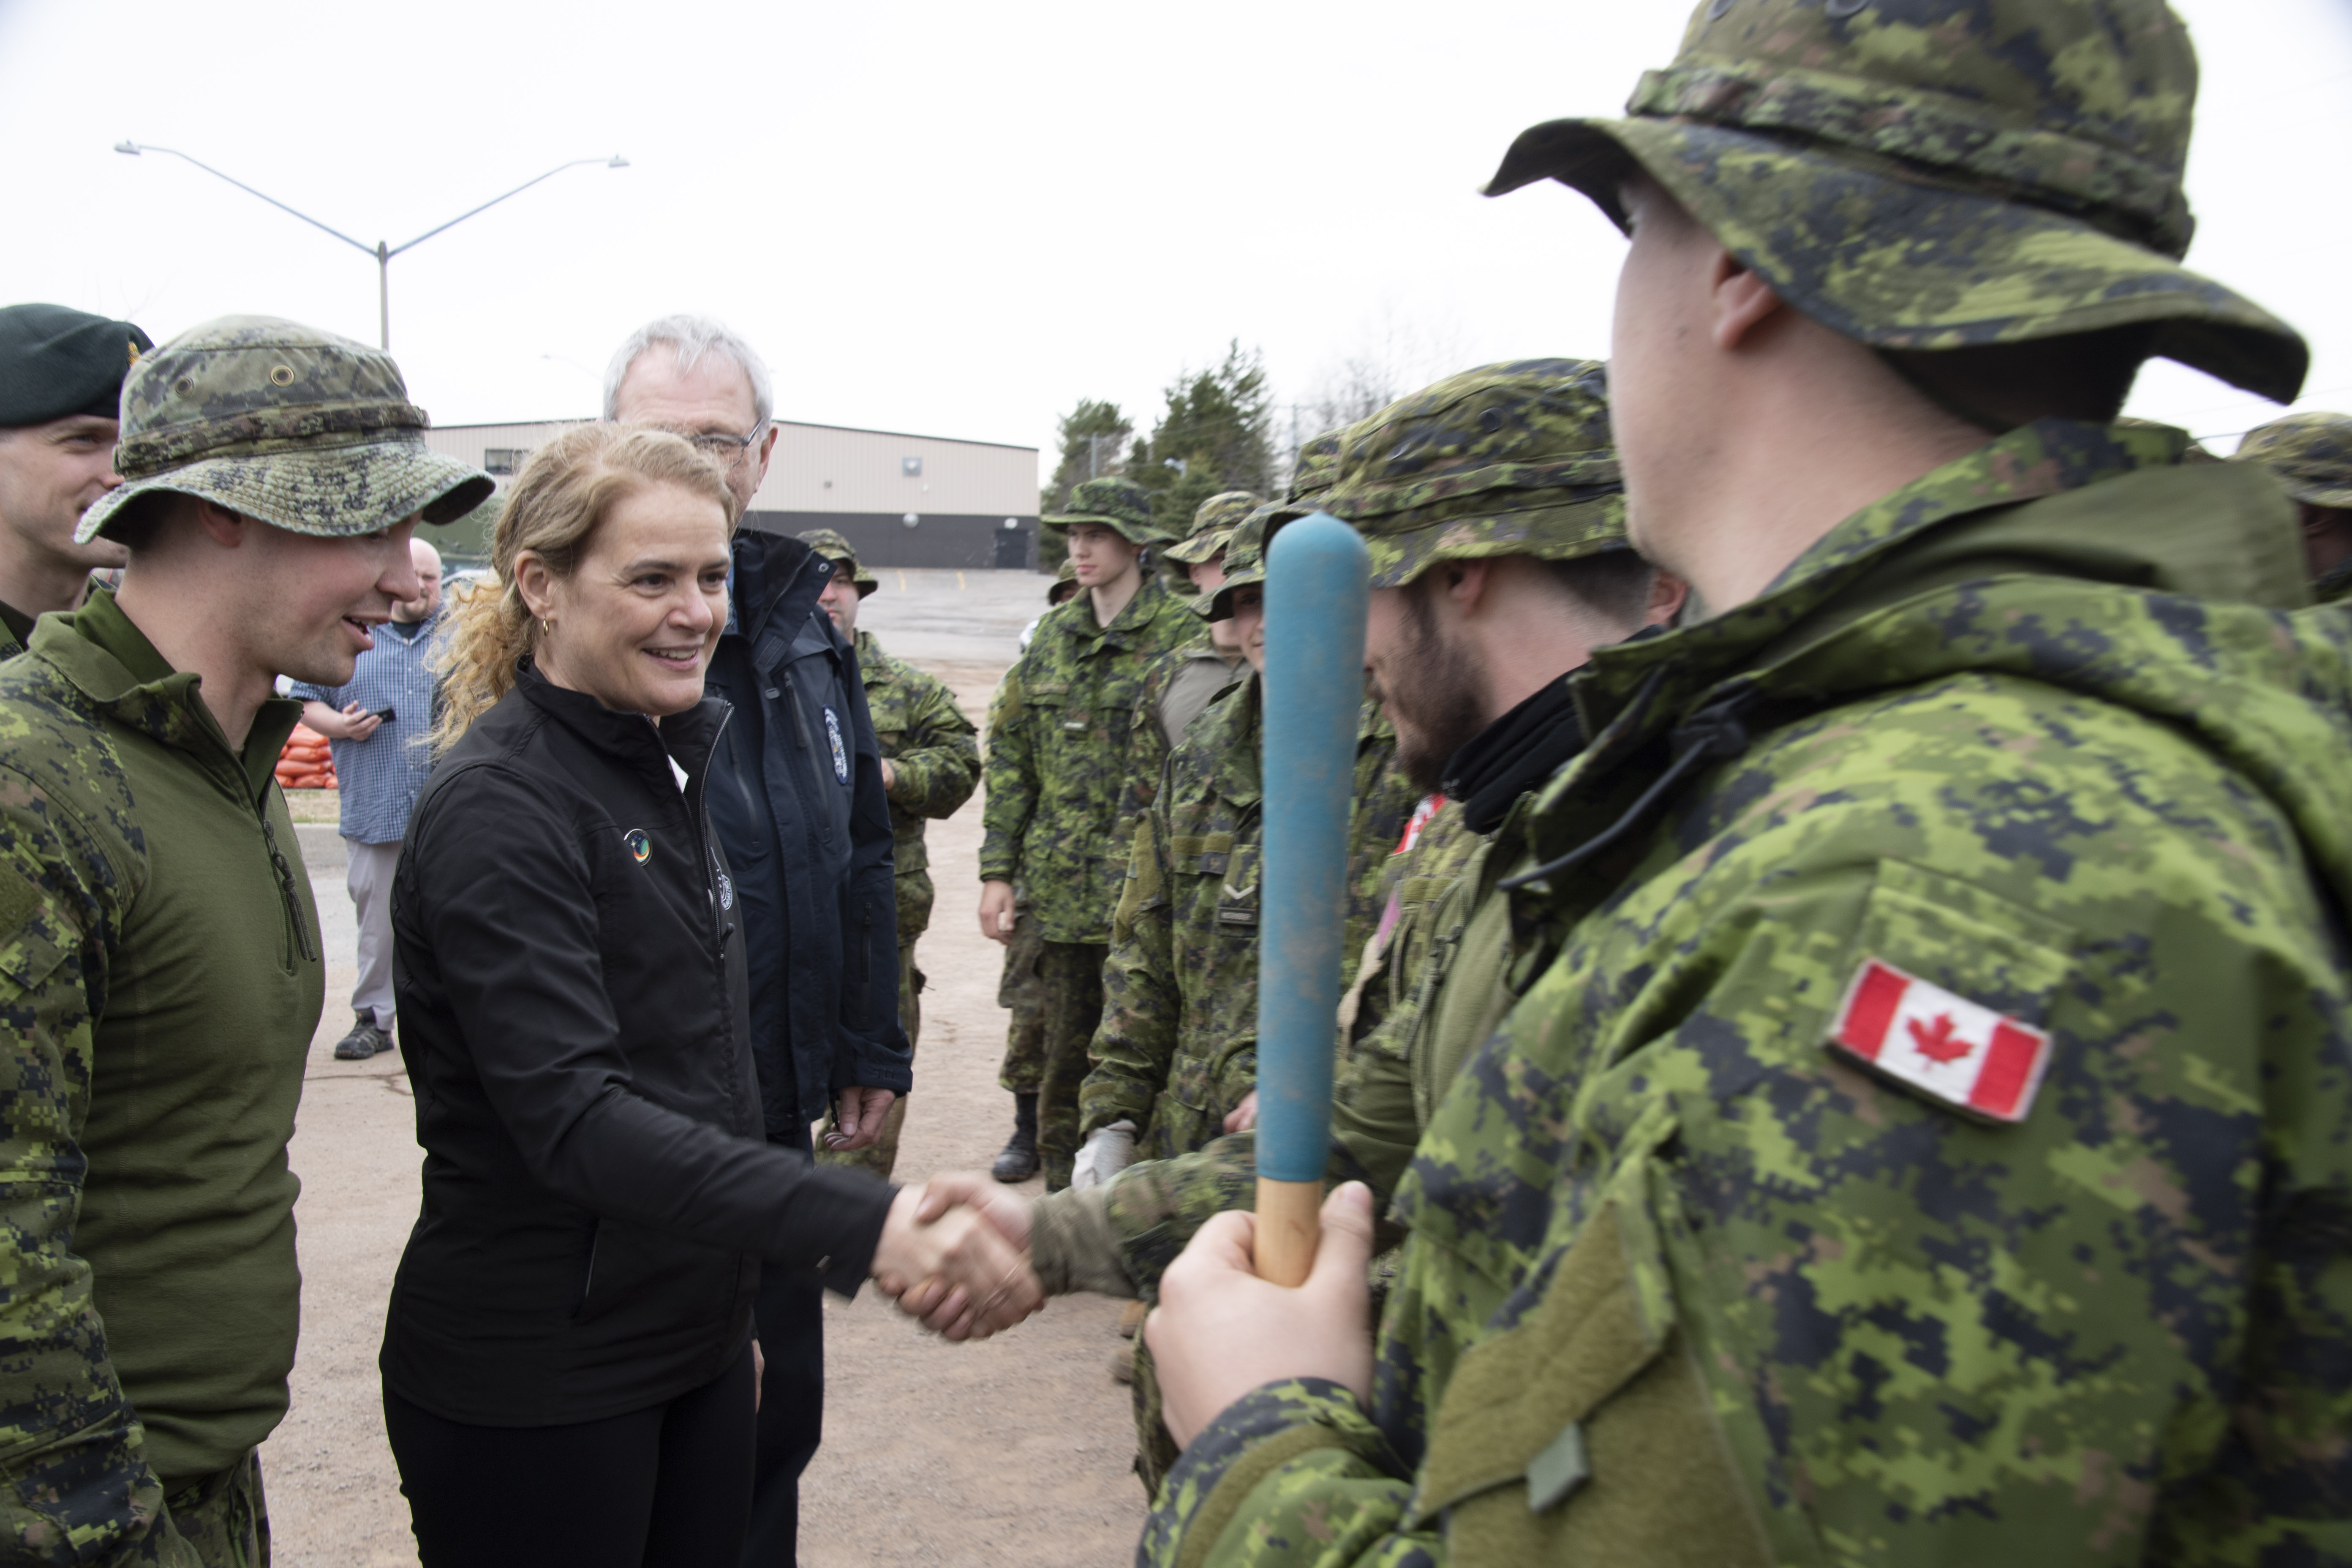 Governor General Julie Payette is greeted by members of the Incident Response Unit in Rothesay, NB where sandbag filling operations take place during Operation LENTUS on 26 April 2019. Photo: Cpl Brett White-Finkle, 5th Cdn Div PA